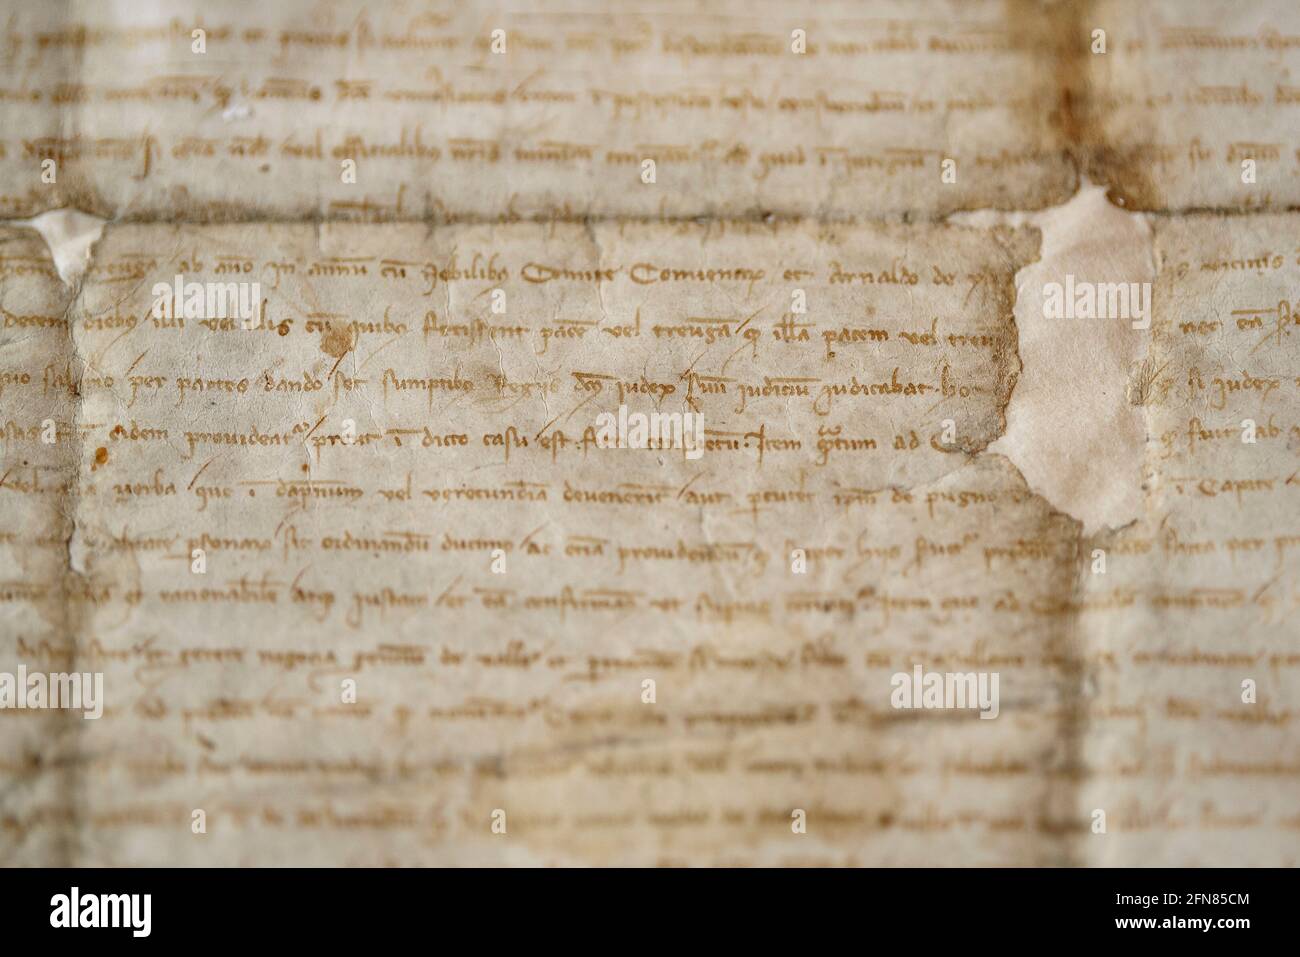 Original historical document of Era Querimònia, which grants the historical rights of the Aran Valley. It is kept in the Archiu Istoric Generau d'Aran Stock Photo